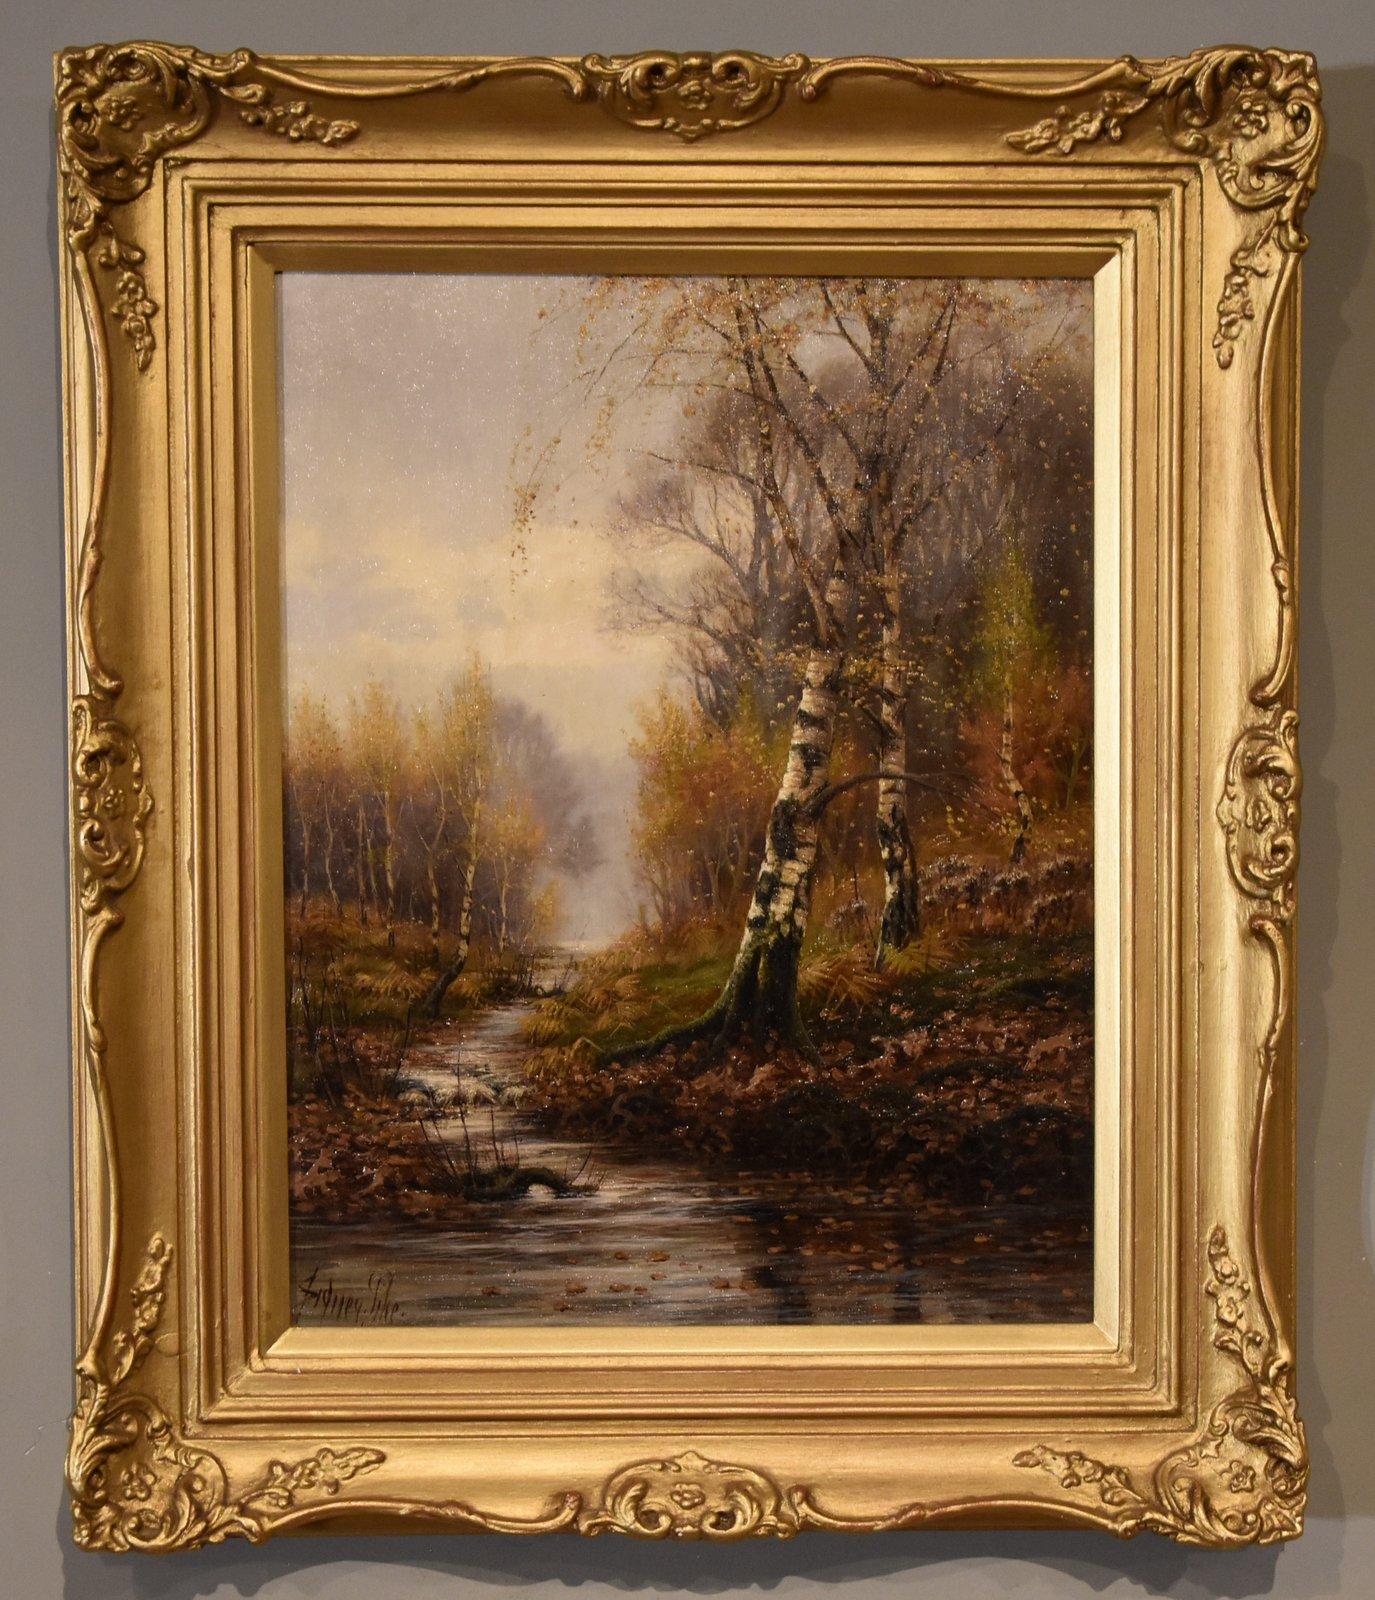 Oil Painting by Sidney Pike "A Woodland Stream" 1858 - 1923 London landscape painter and one of the first Christmas card illustrators. Settled in Hastings, represented in many museums. Oil on canvas, signed.

Dimensions unframed 18 x